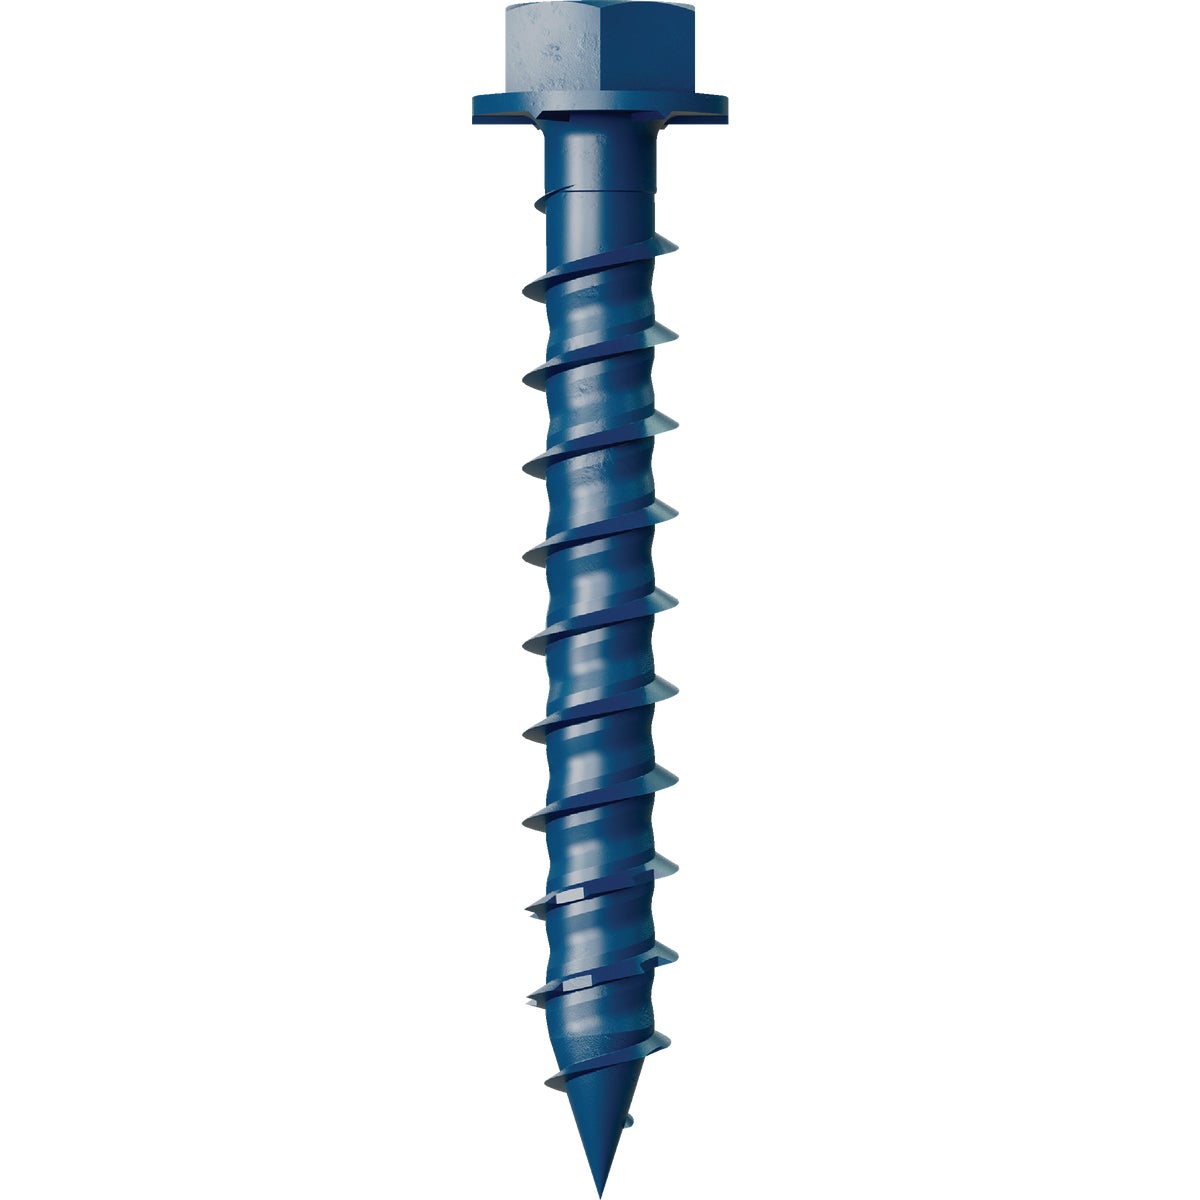 Simpson Strong-Tie Titen Turbo  1/4 in. x 1-3/4 in. Hex-Head Concrete and Masonry Screw, Blue (100-Qty)